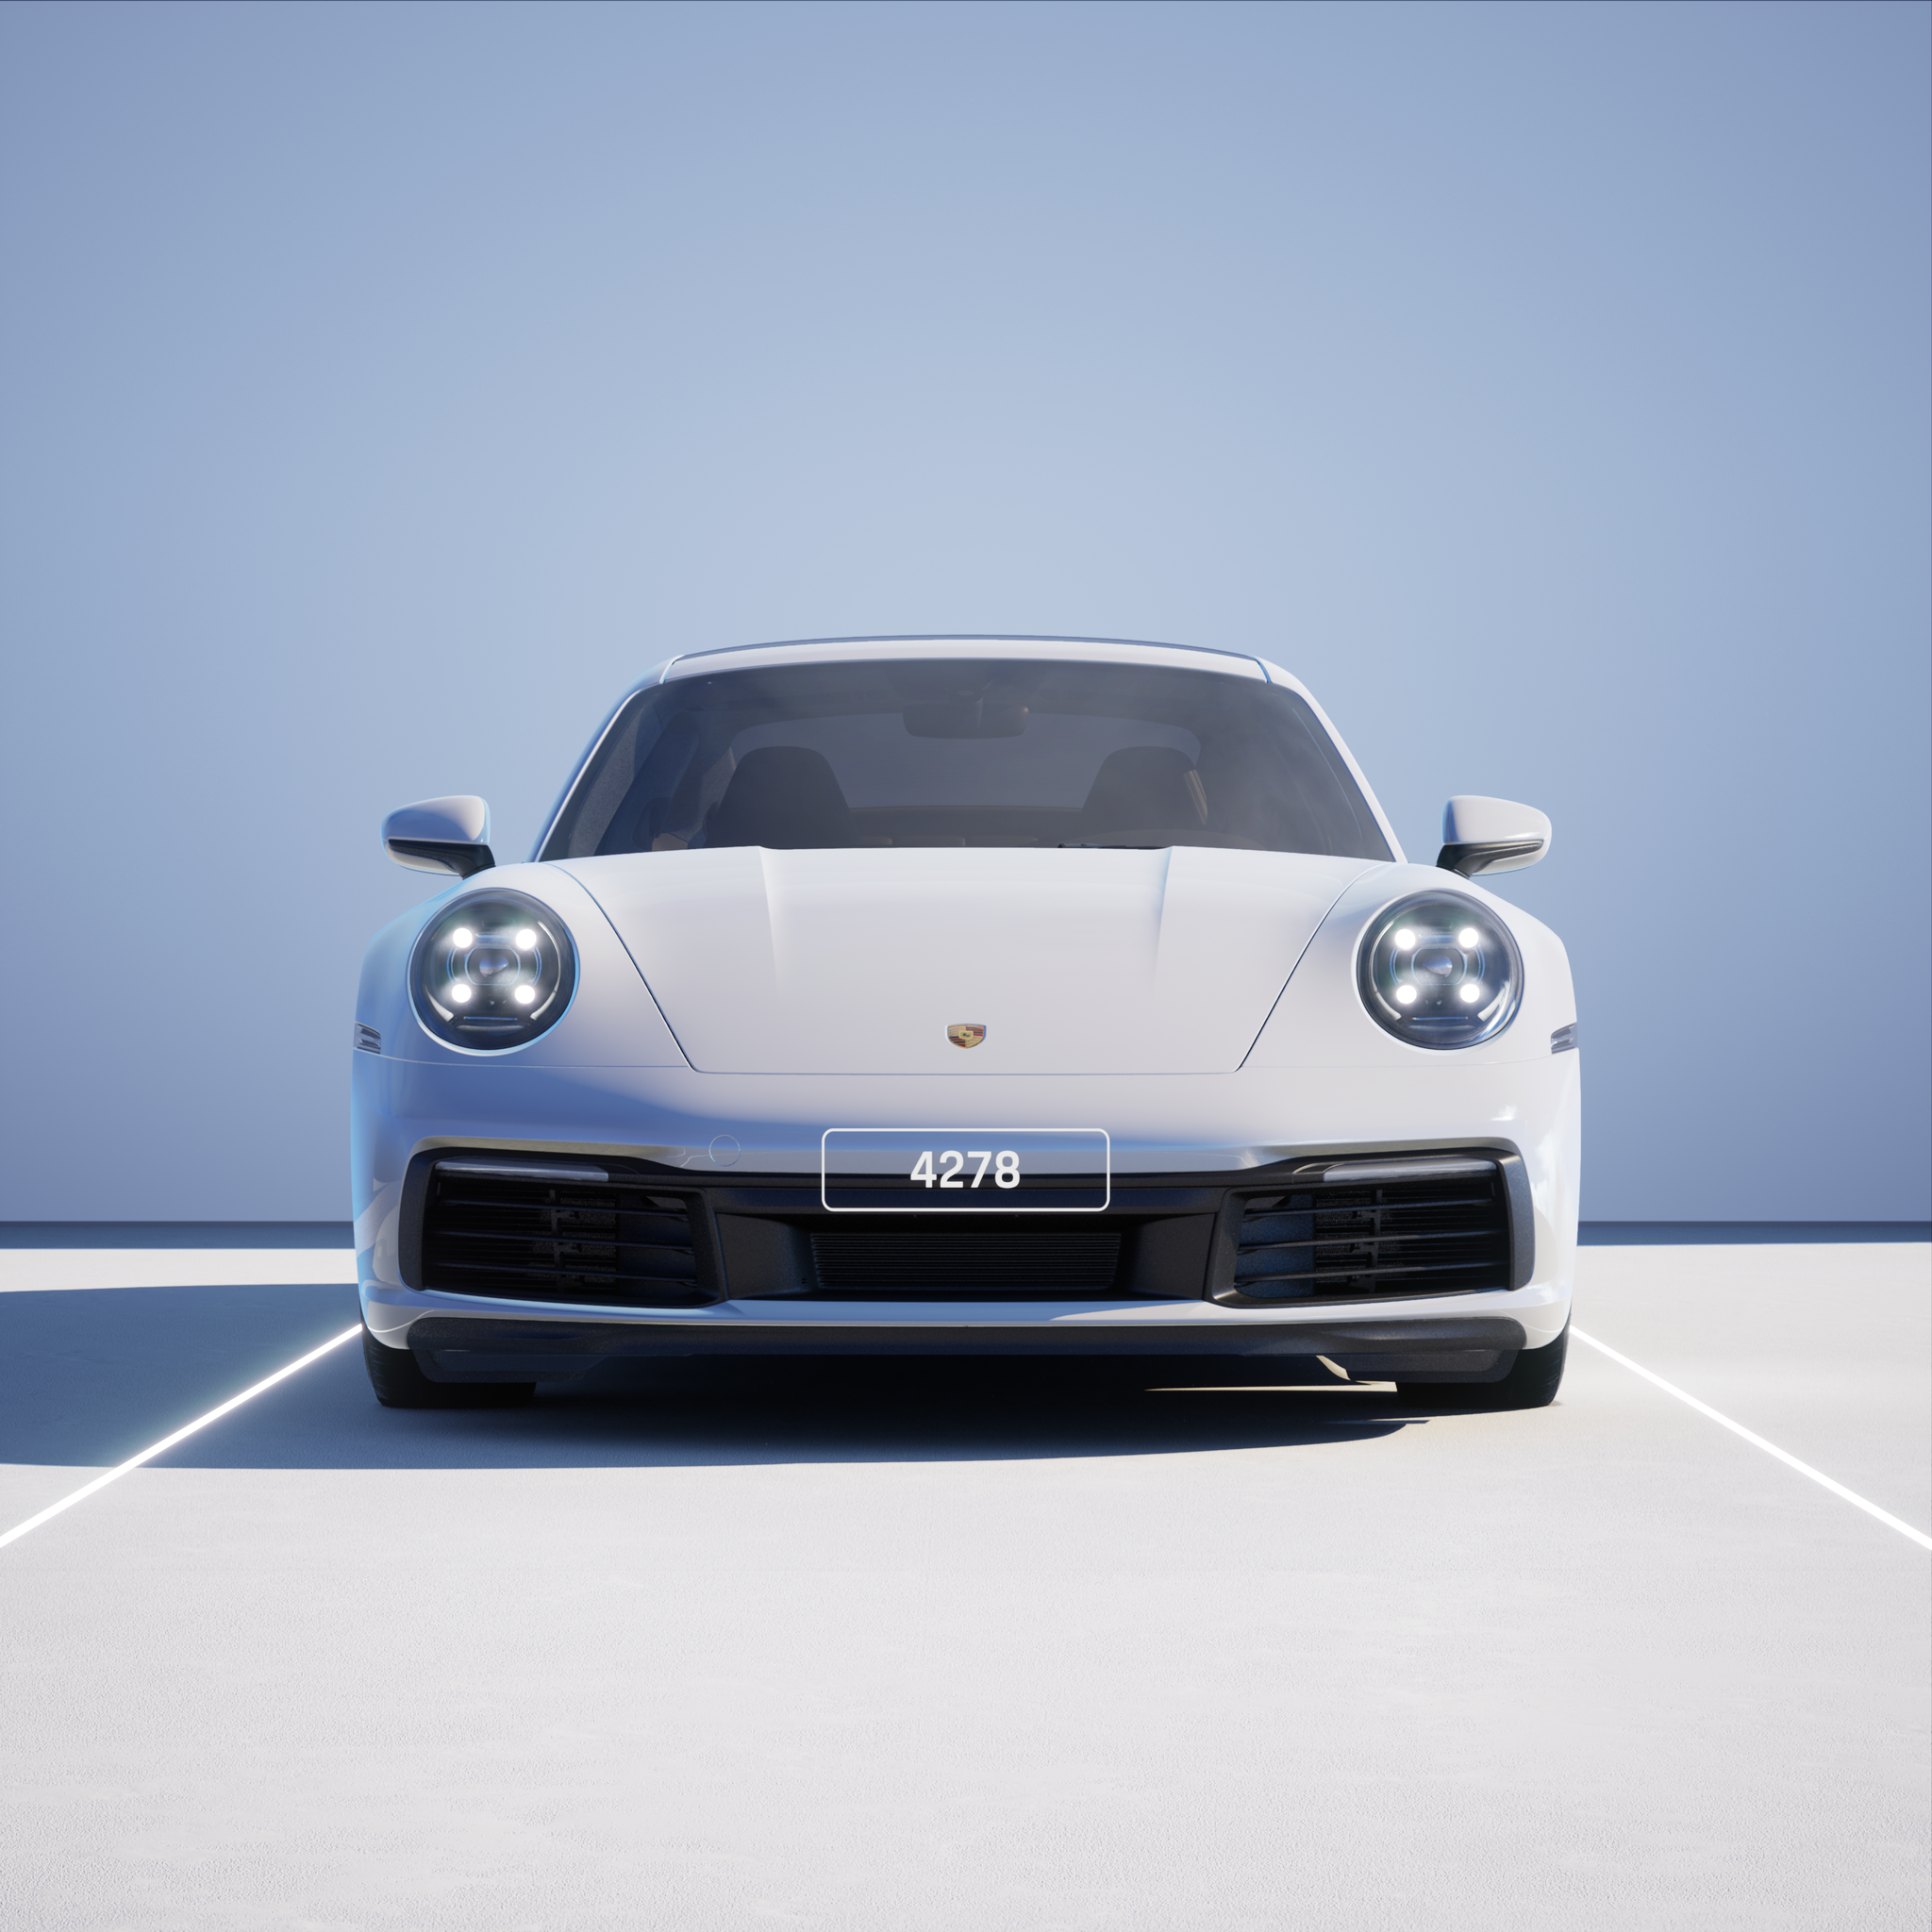 The PORSCHΞ 911 4278 image in phase